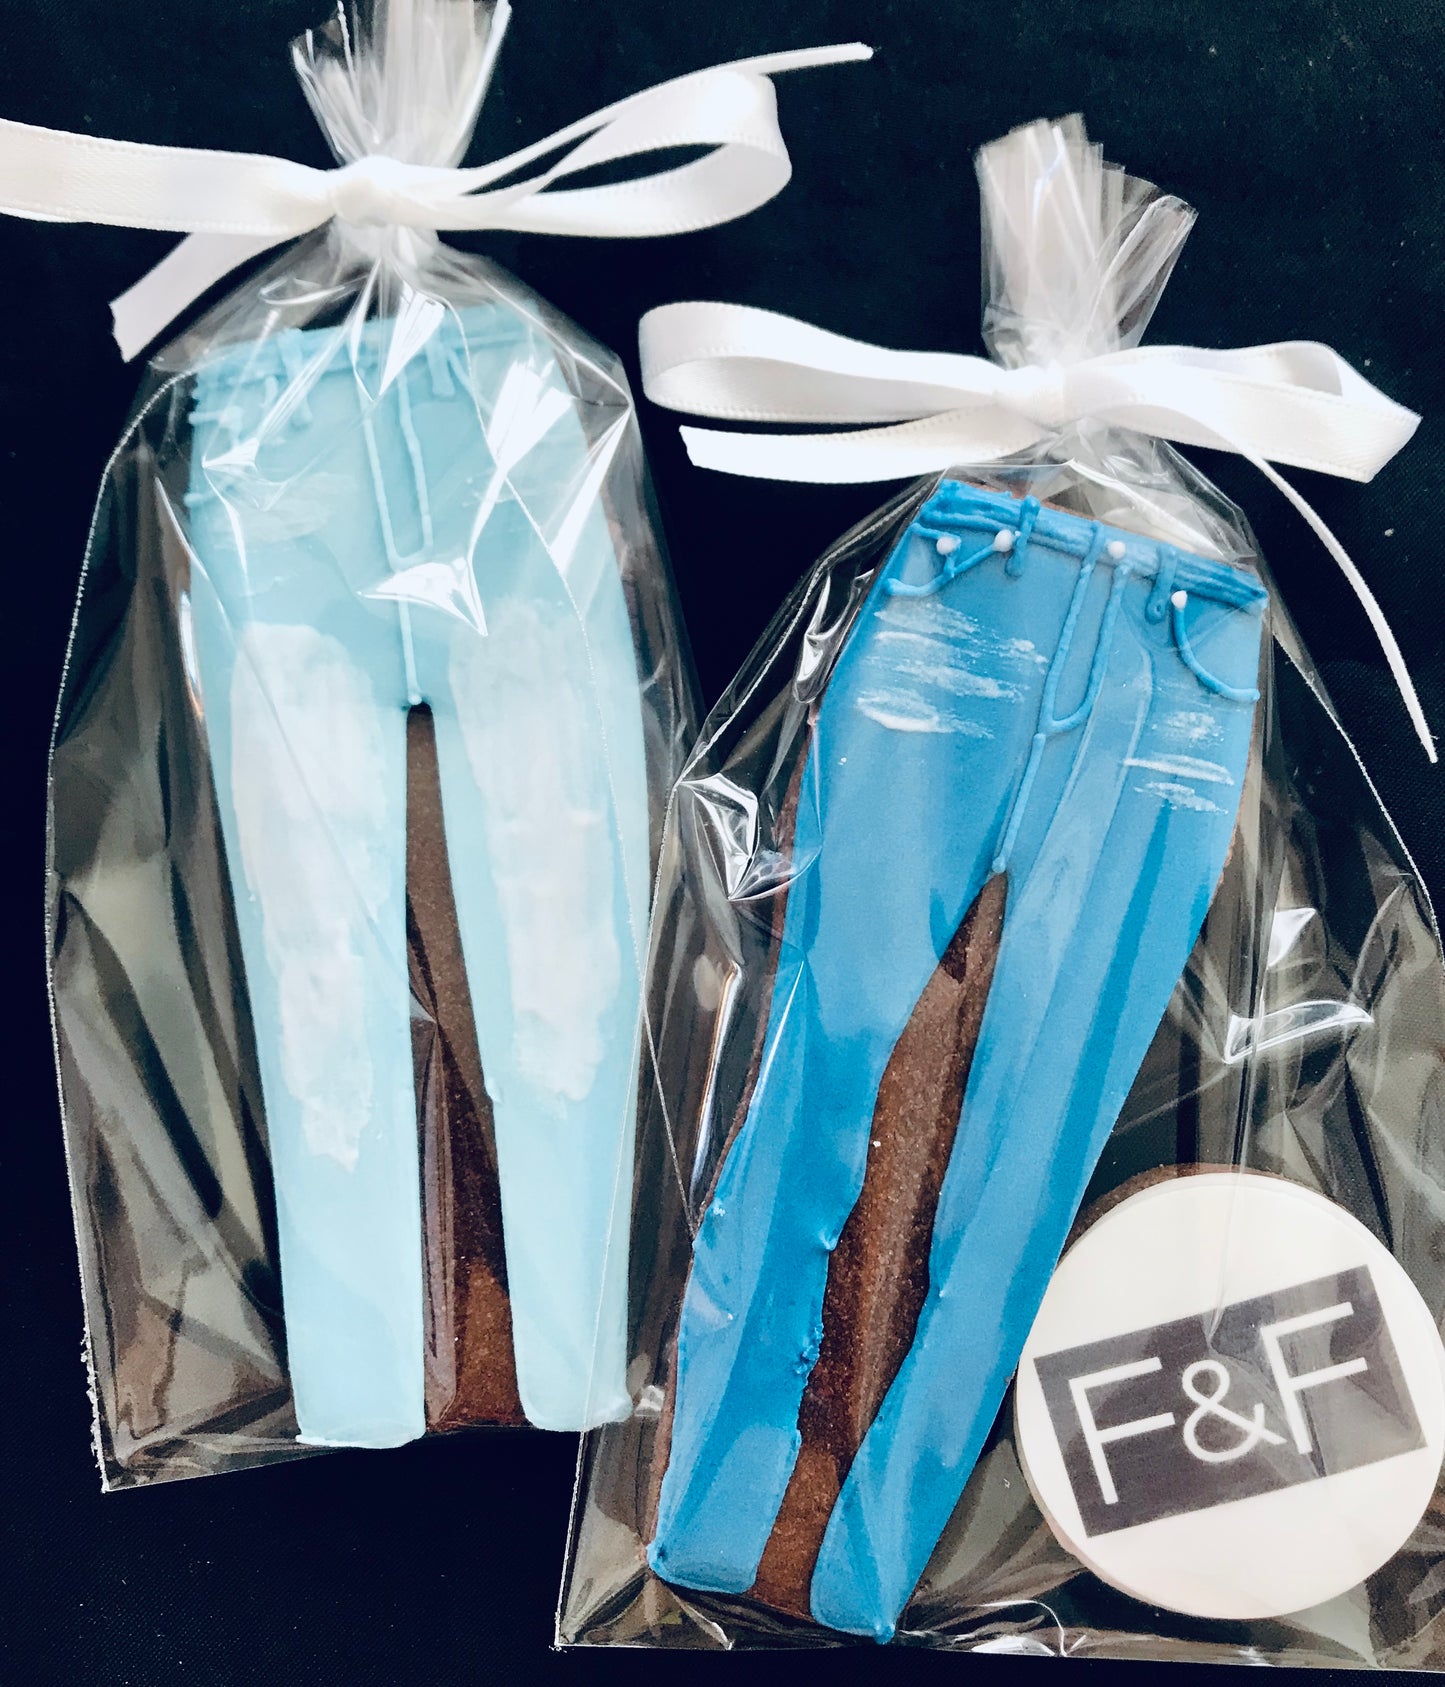 F&F jeans biscuits, individually wrapped one cellophane to celebrate the launch of a new range of jeans. hand iced jeans cookies.